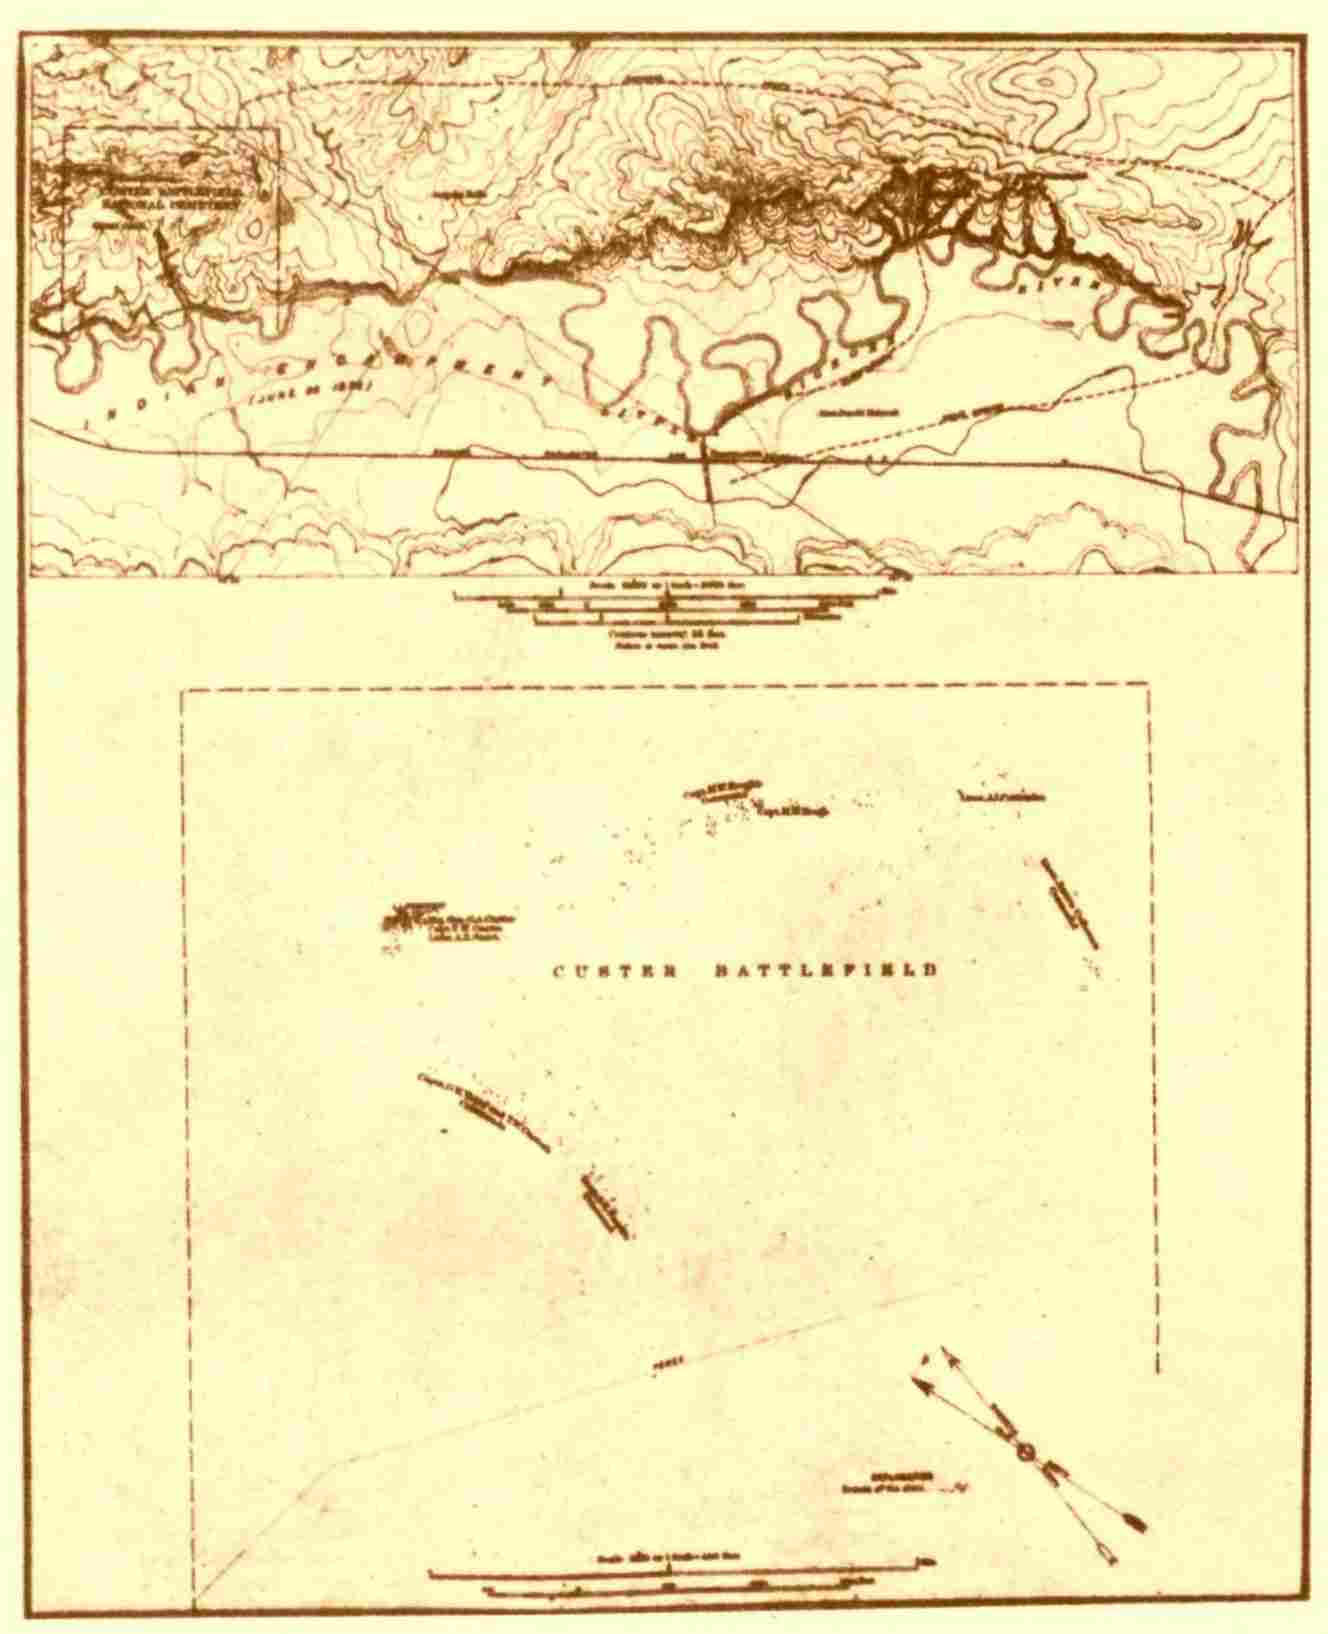 Map of the Custer Battlefield